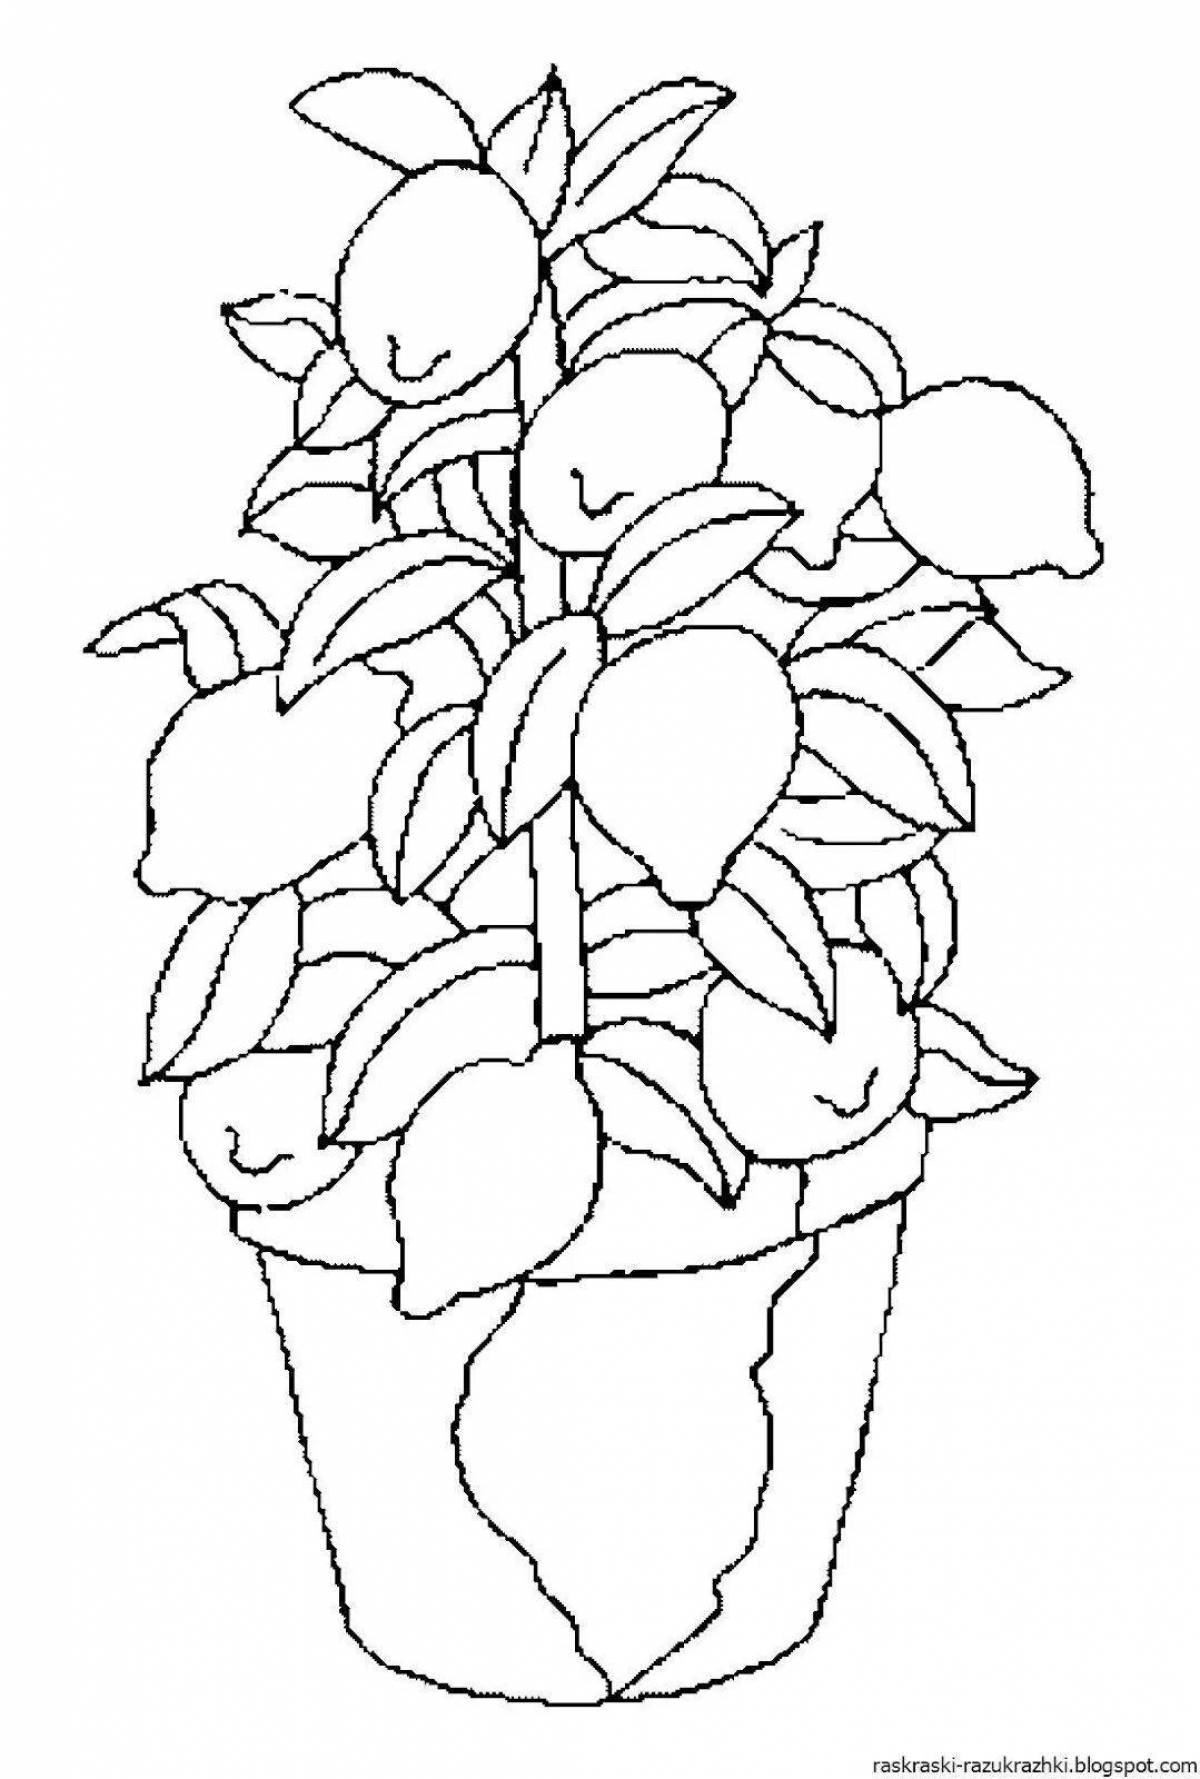 Amazing indoor flower coloring pages for 4-5 year olds